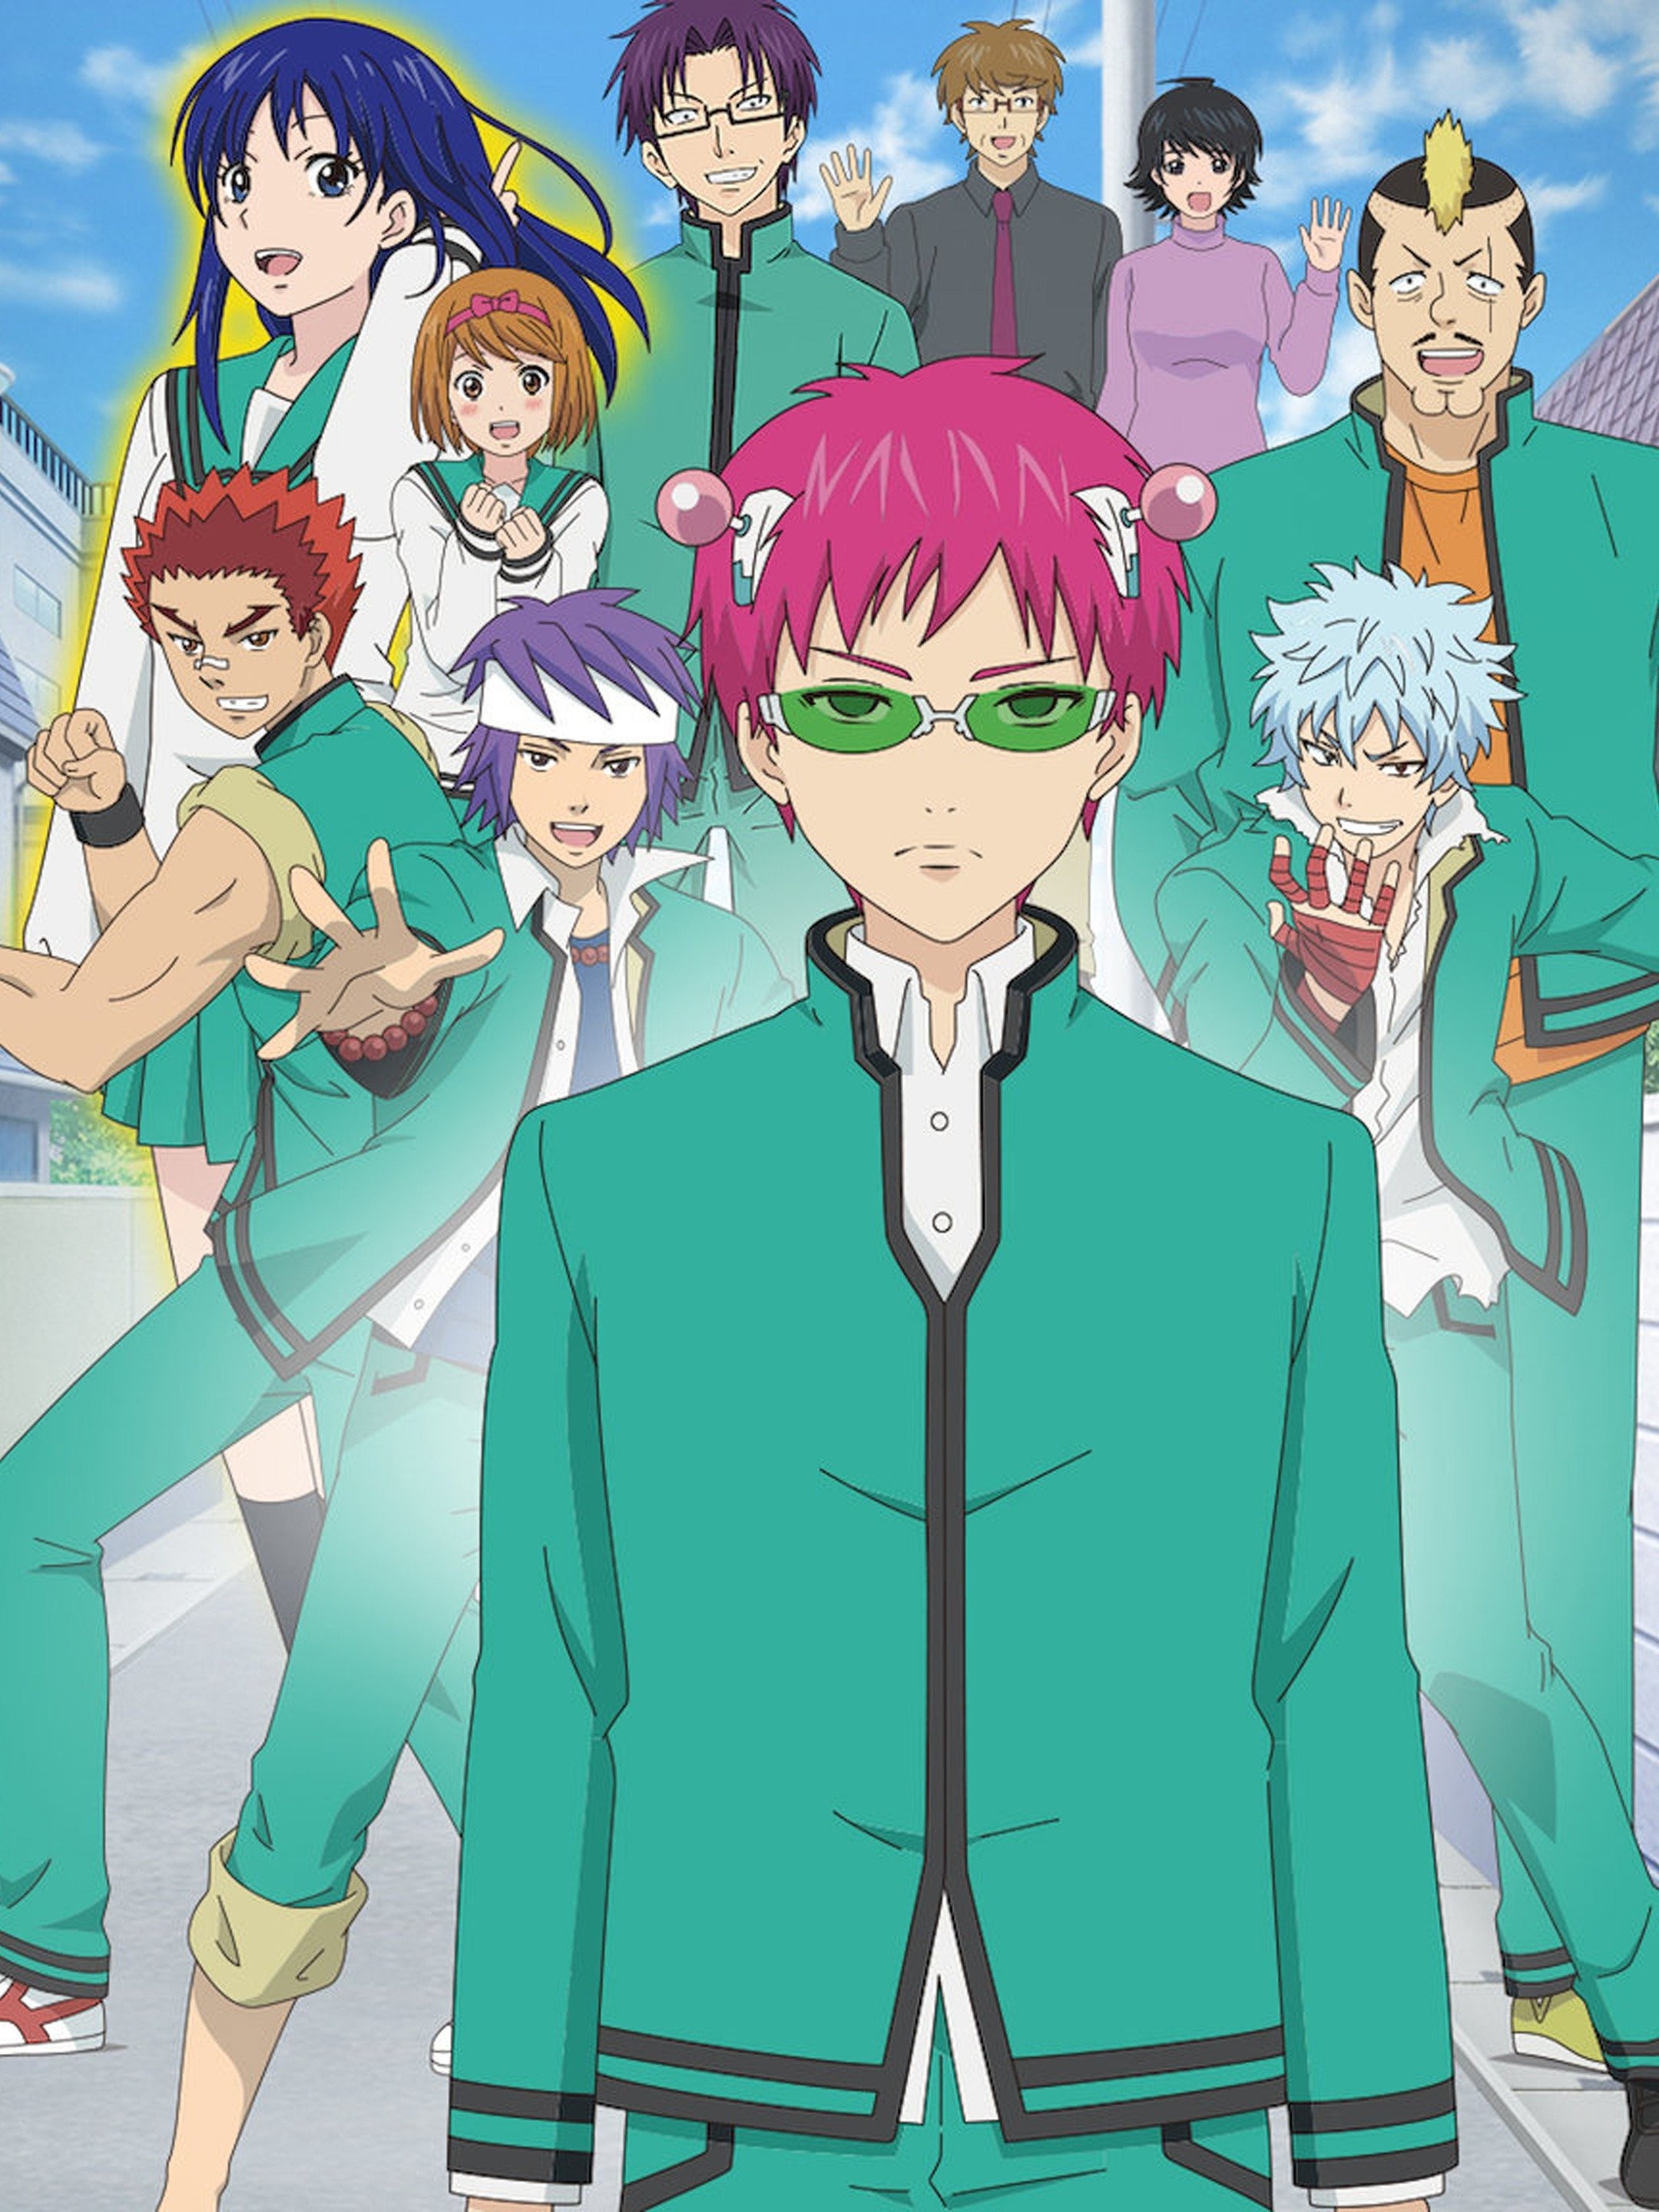 Qoo News] The Disastrous Life of Saiki K. mobile game is ready for  pre-registration